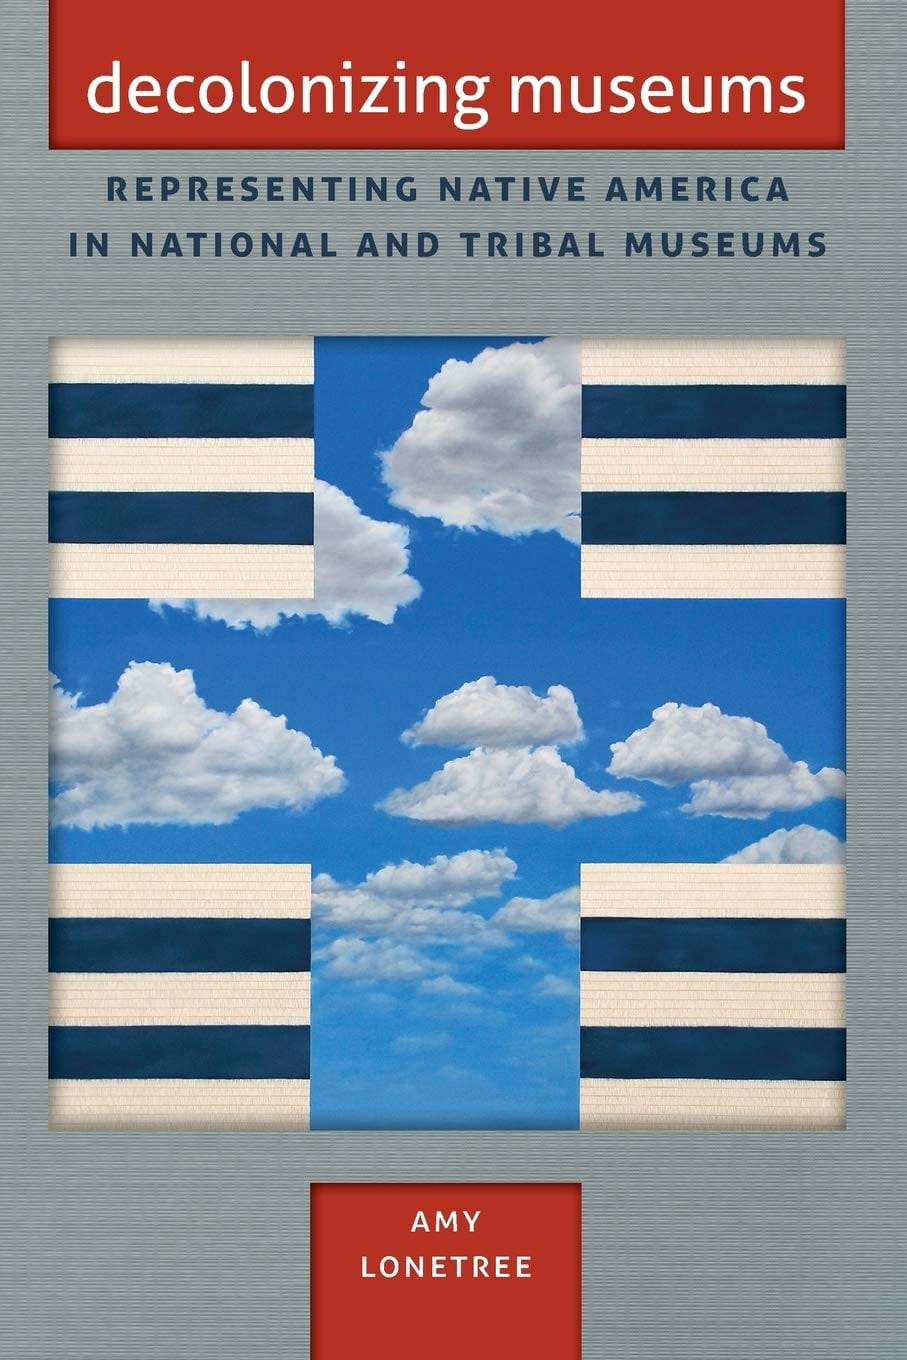 The book cover of Decolonizing Museums: Representing Native America in National and Tribal Museums by Amy Lonetree